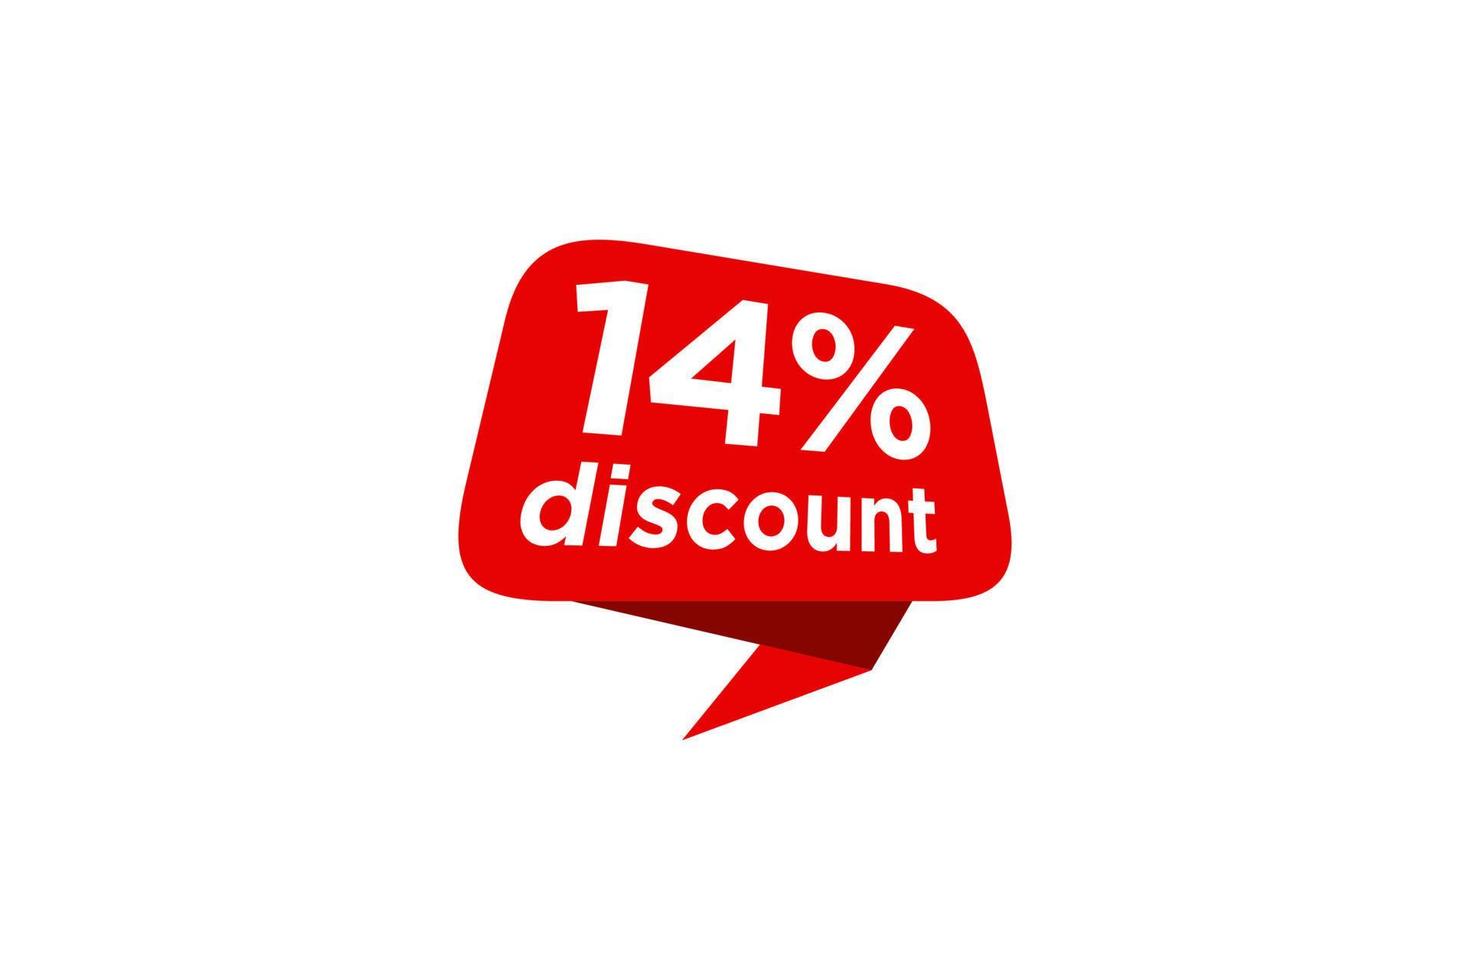 14 discount, Sales Vector badges for Labels, , Stickers, Banners, Tags, Web Stickers, New offer. Discount origami sign banner.